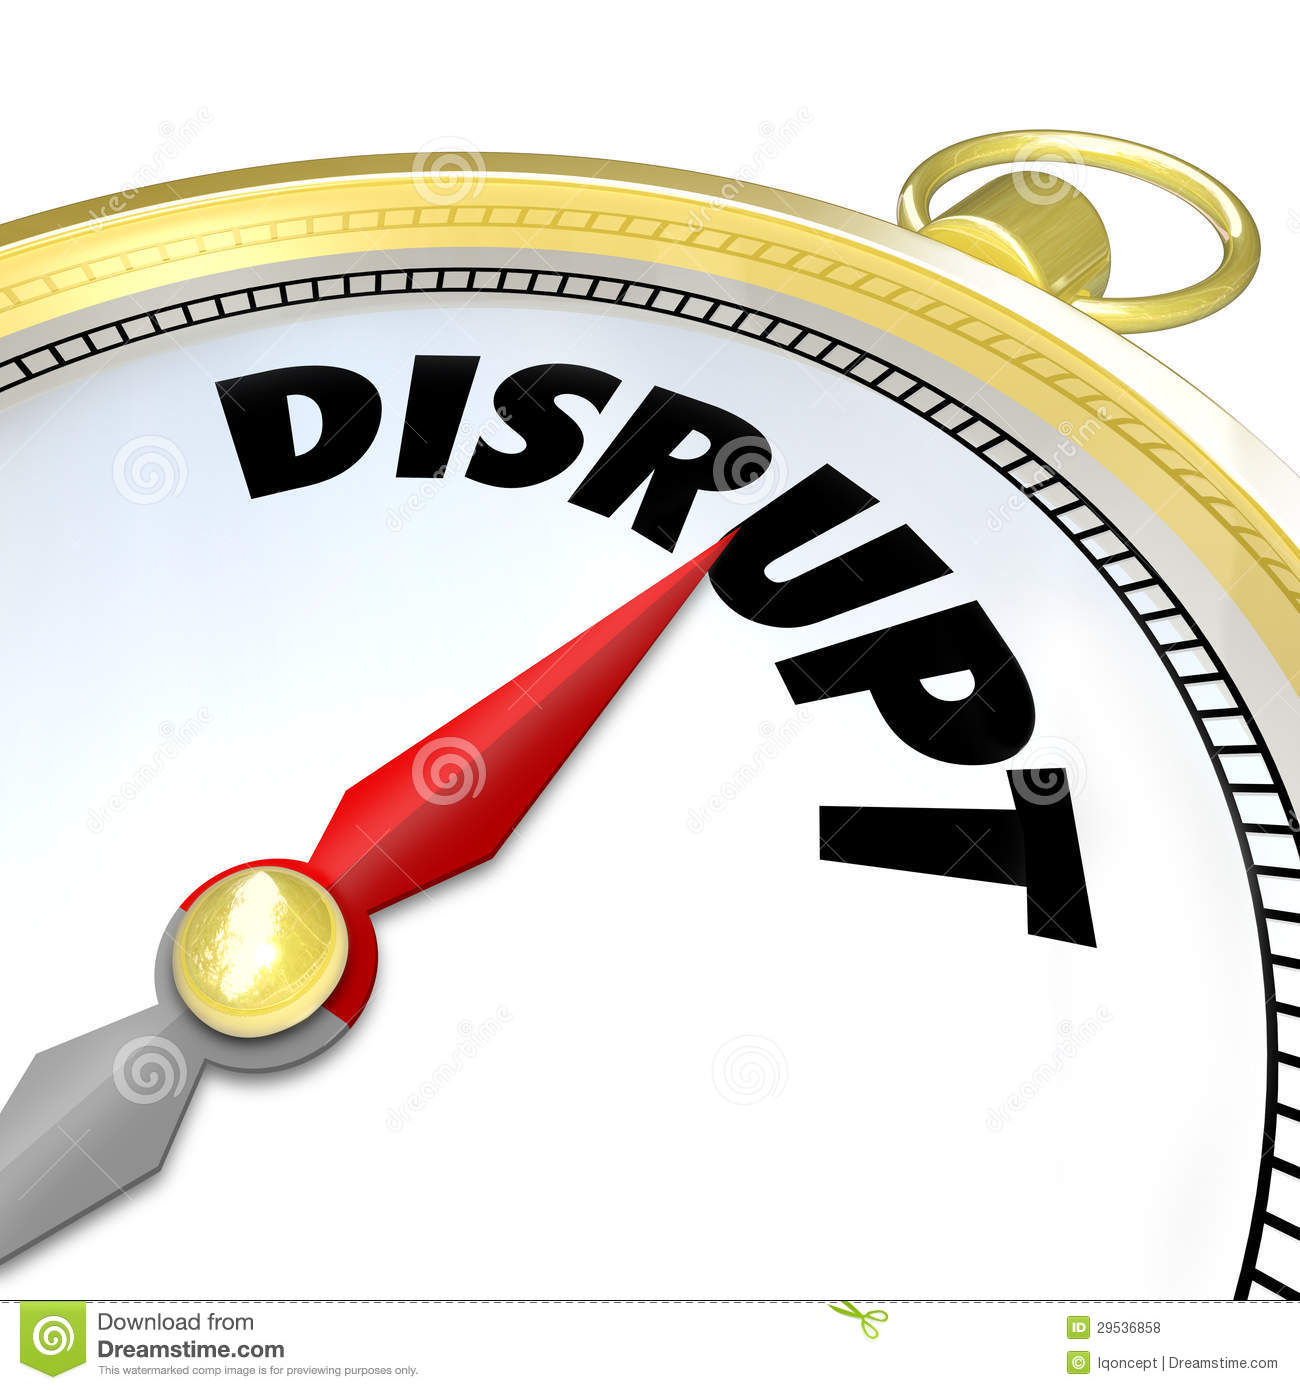 The Word Disrupt On A Compass Symbolizing A New Paradigm Shift Being